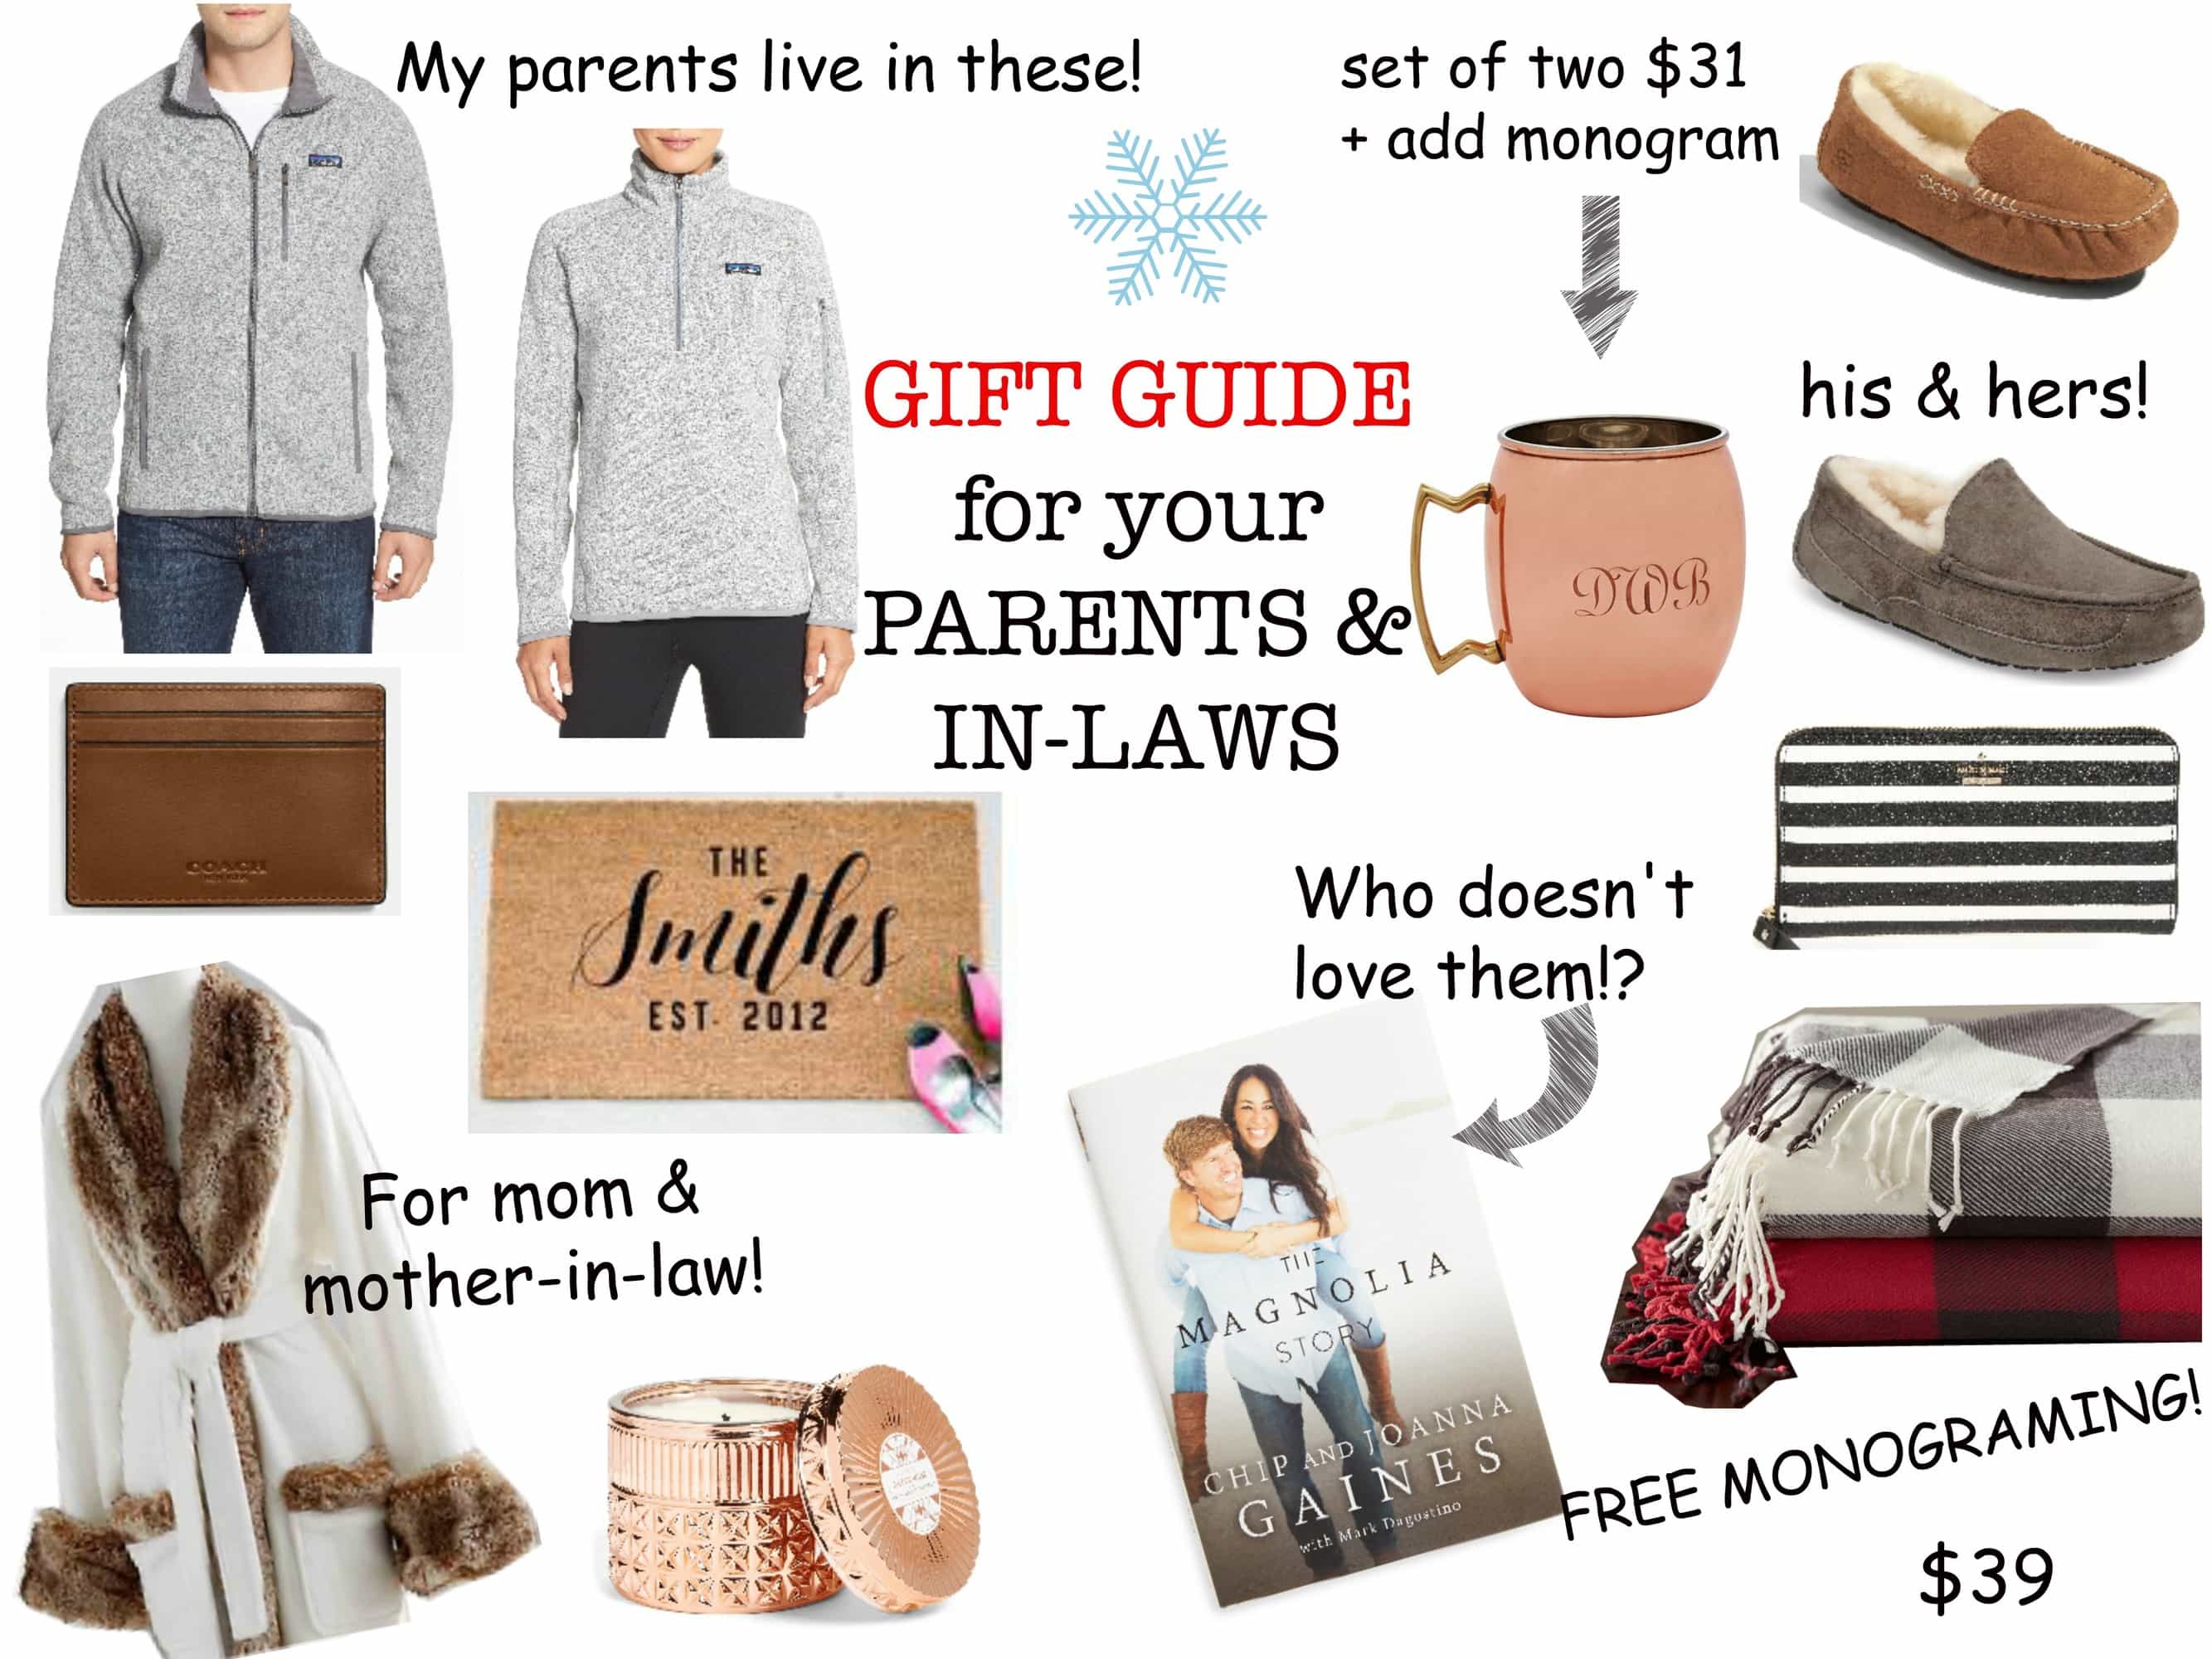 15+ Thoughtful Gifts For In Laws, Parents and other couples